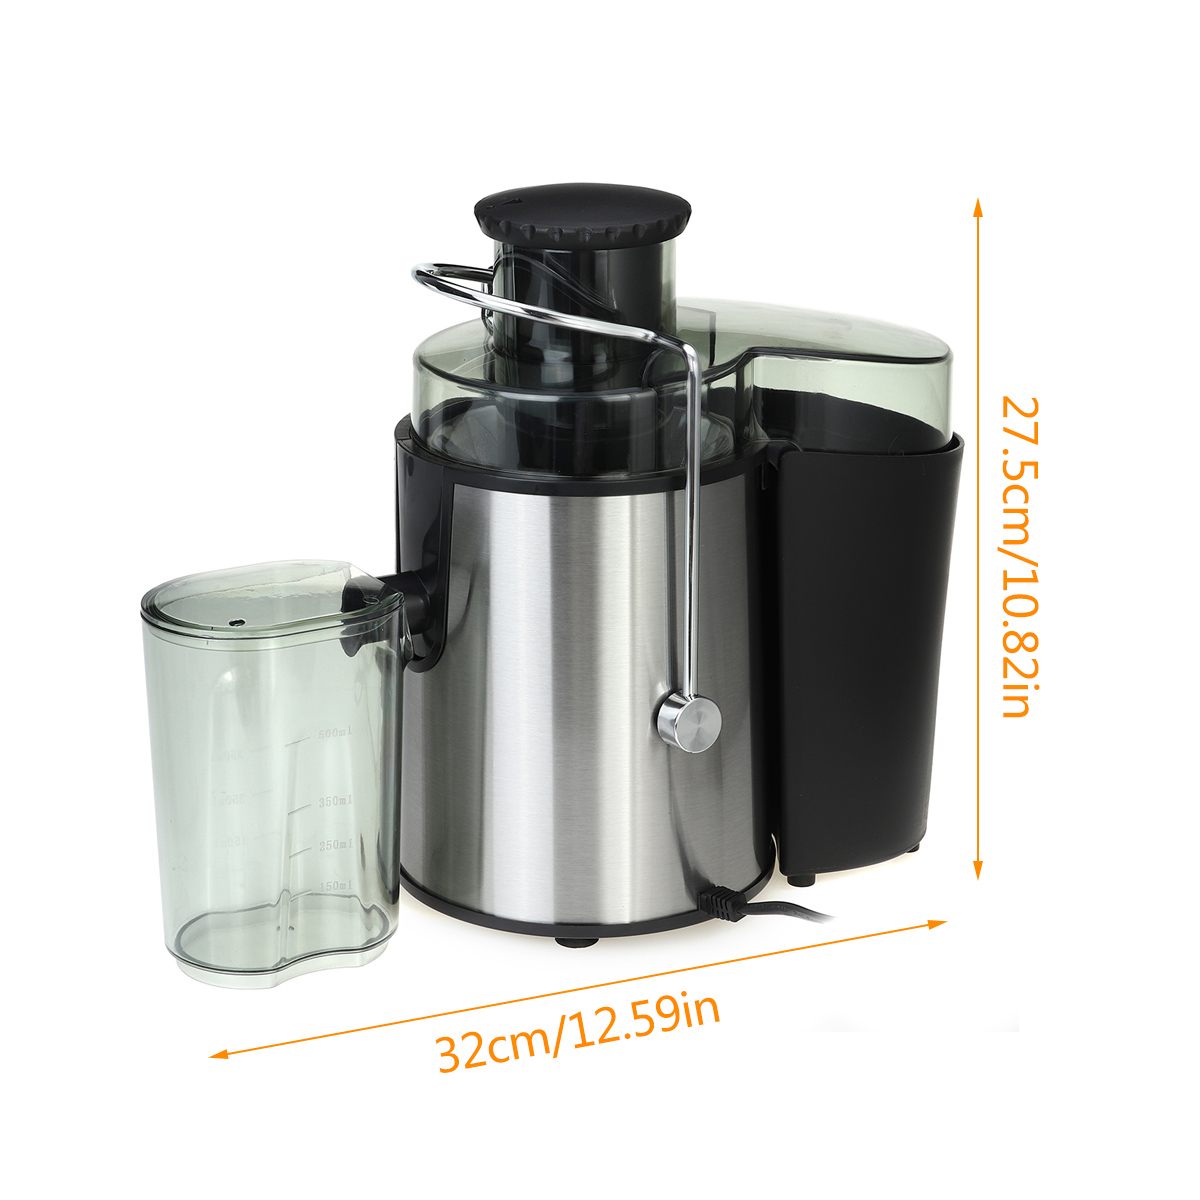 1000W 220V 2 Speed Electric Juice Extractor Stainless Steel Juicers Household Fruit Vegetables Drinking Machine for Home Kitchen